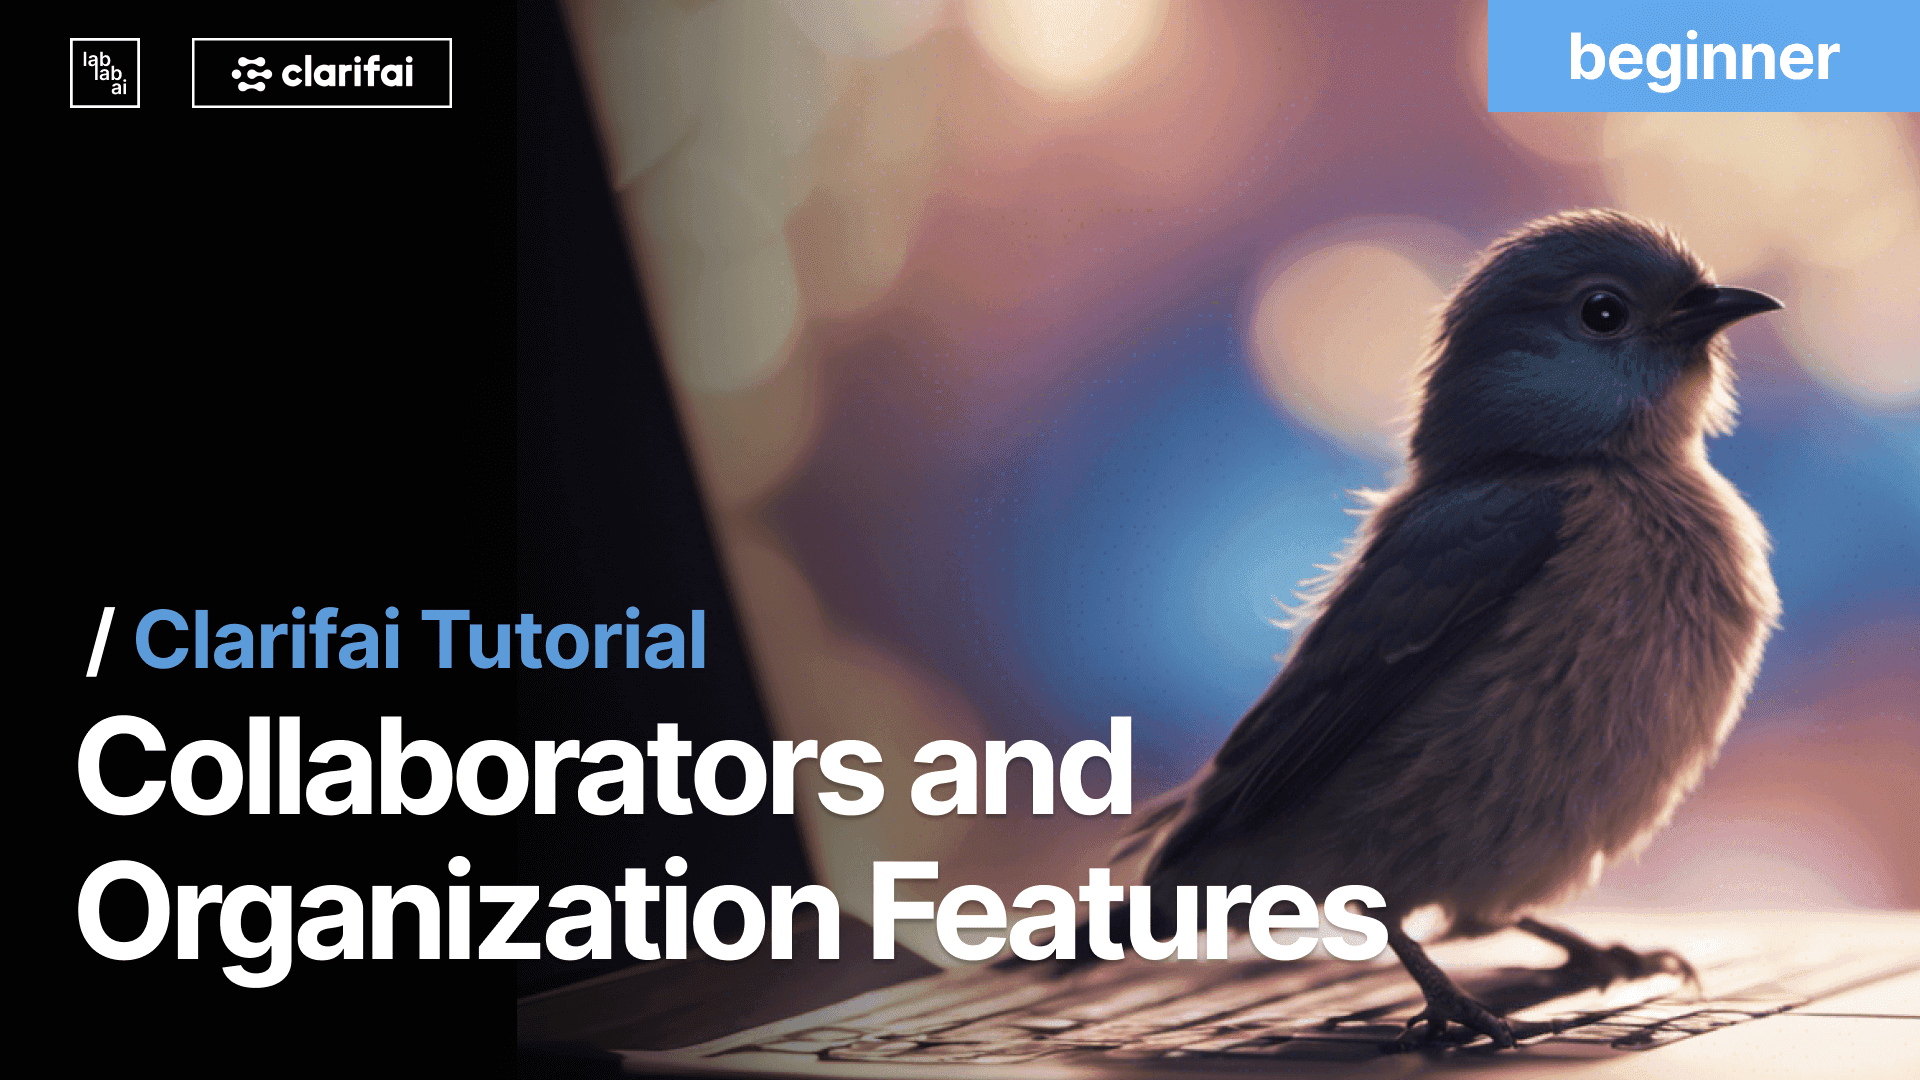 How to Use Collaborators and Organization Features within the Clarifai Platform